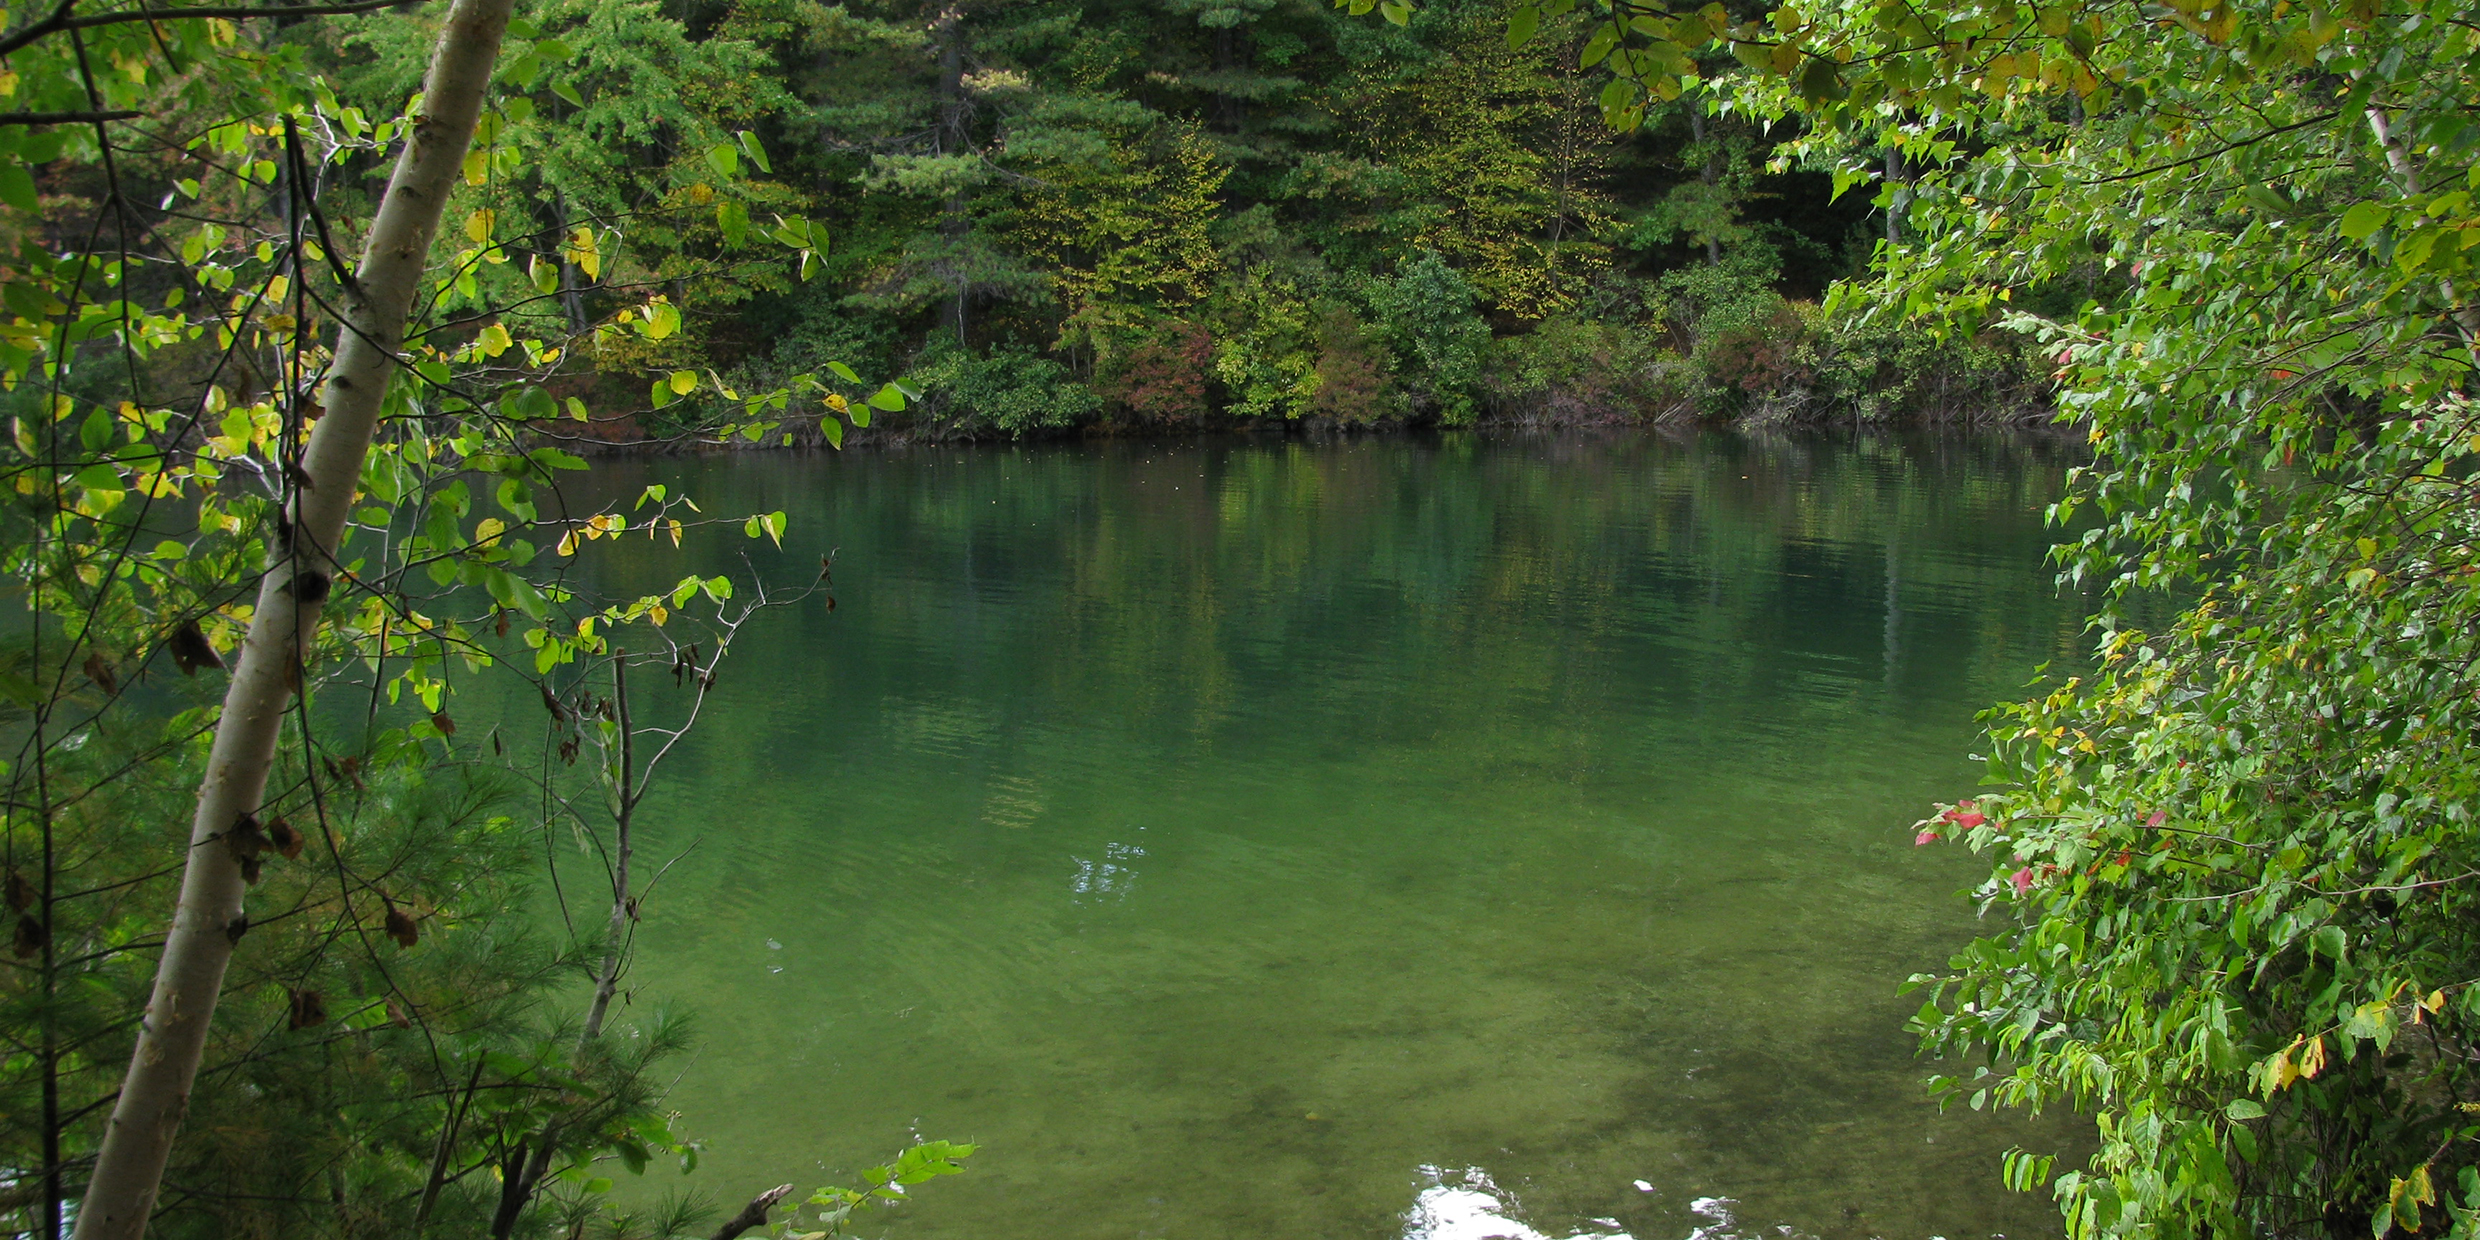 Image of a green pond surrounded by green leafy trees